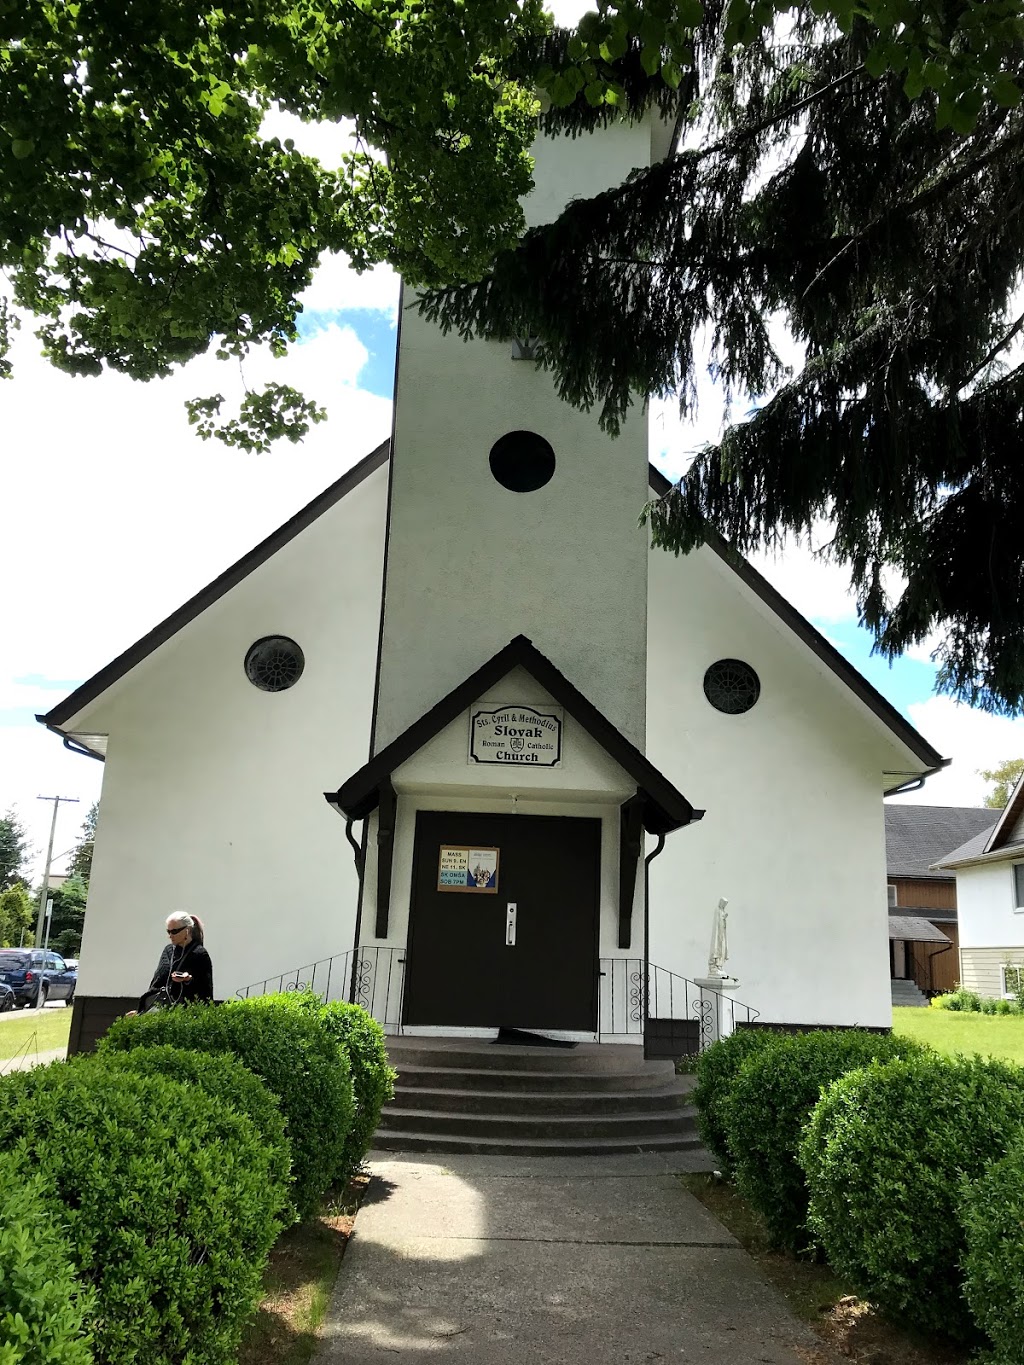 Sts. Cyril and Methodius Parish | church | 472 E 8th Ave, New Westminster, BC V3L 4L2, Canada | 6045267351 OR +1 604-526-7351